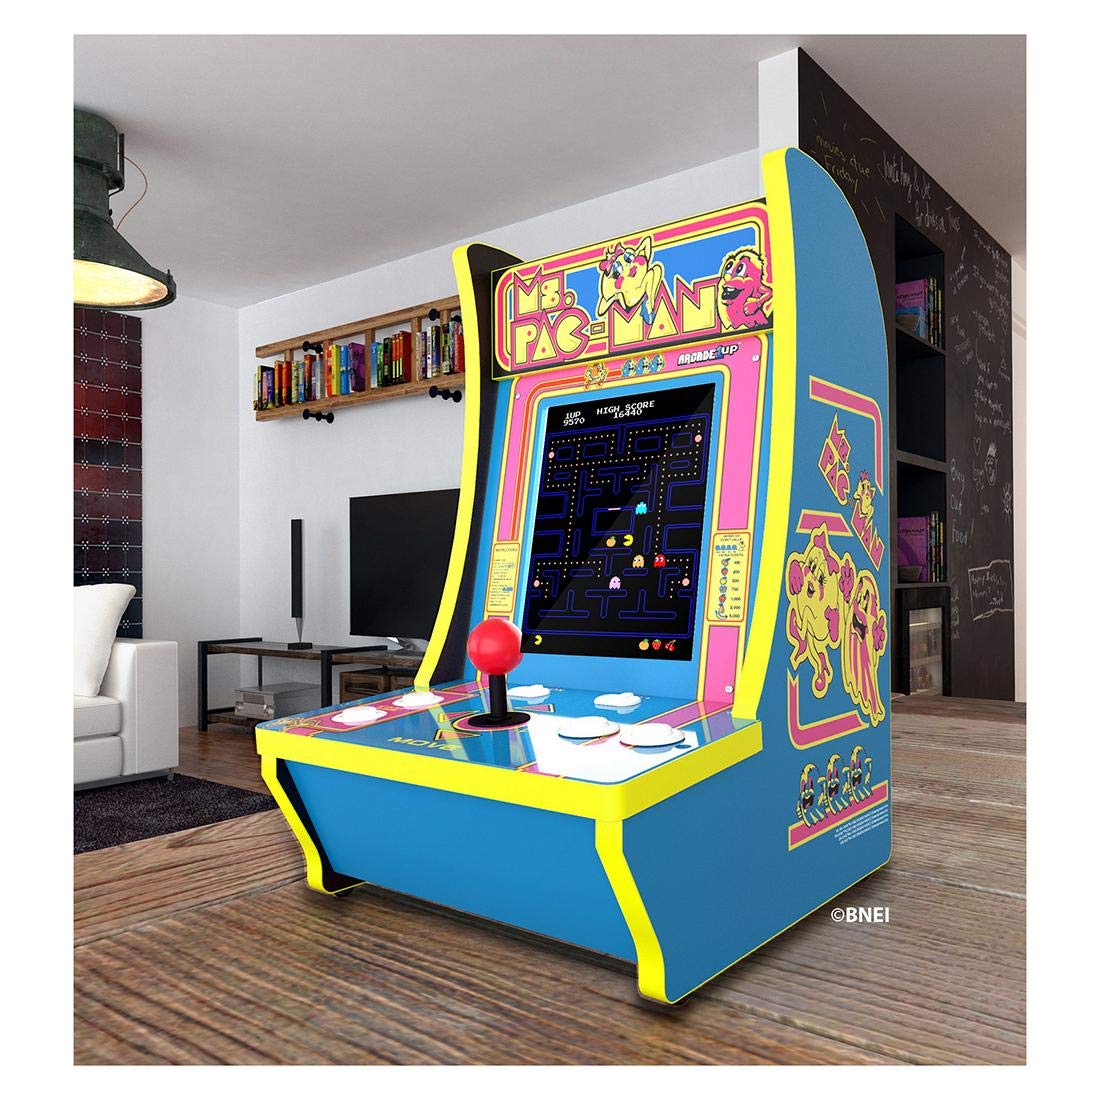 MSP Arcade1Up MS.Pac-Man Counter-Cade - 4 Games in 1